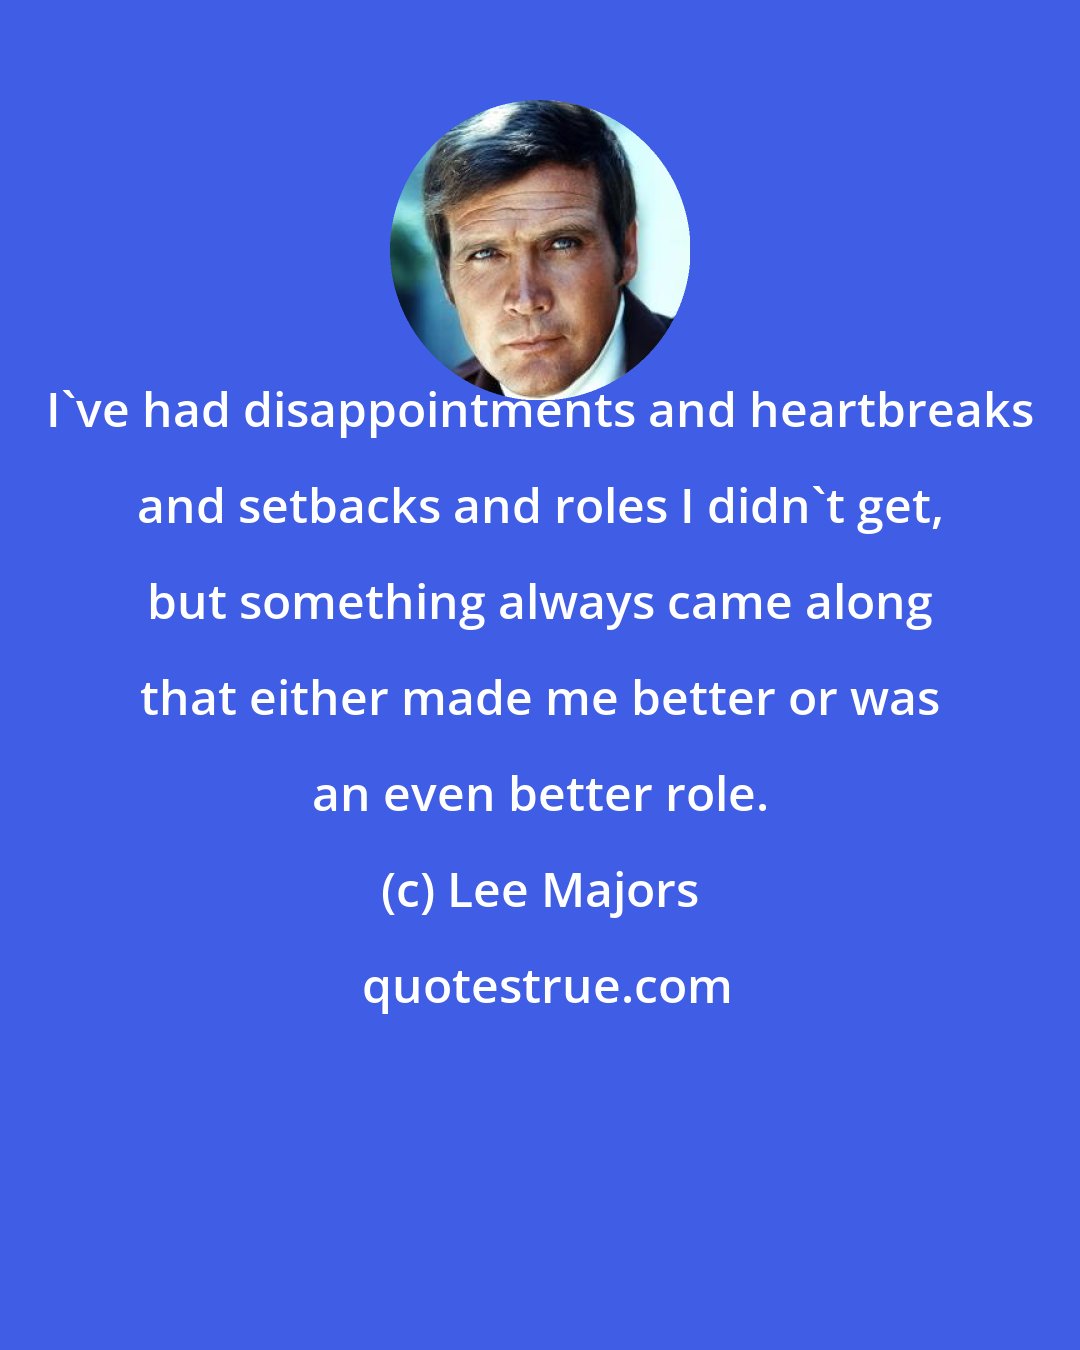 Lee Majors: I've had disappointments and heartbreaks and setbacks and roles I didn't get, but something always came along that either made me better or was an even better role.